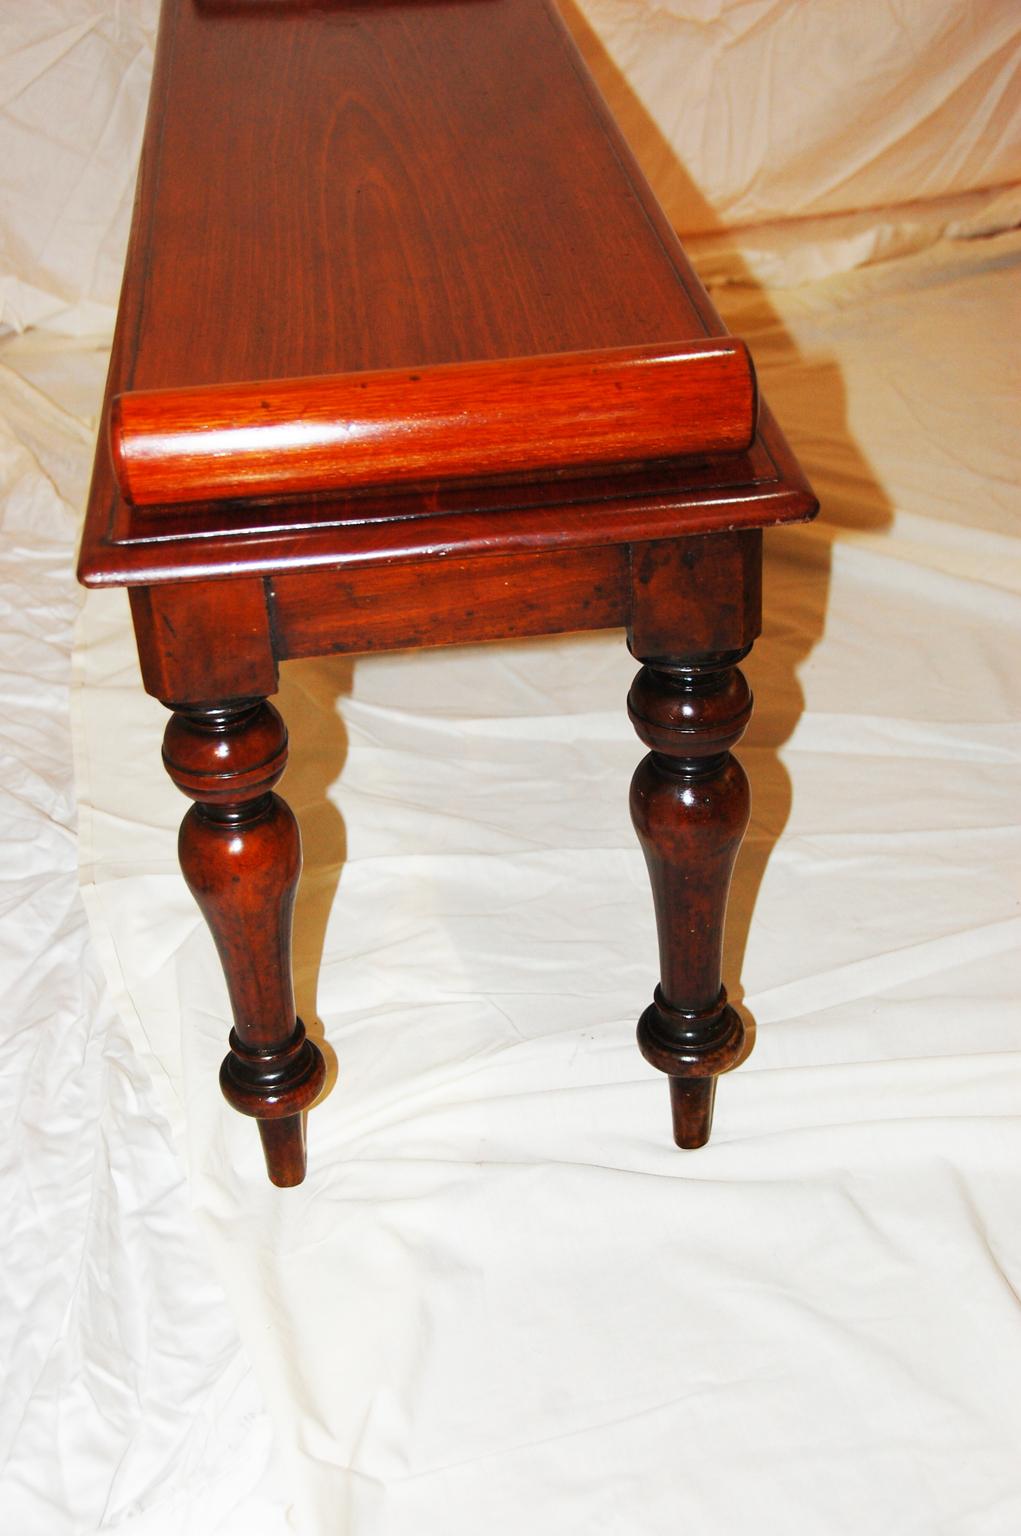 English 19th Century Walnut Hall Bench with Turned Legs, Four Feet Long In Good Condition For Sale In Wells, ME